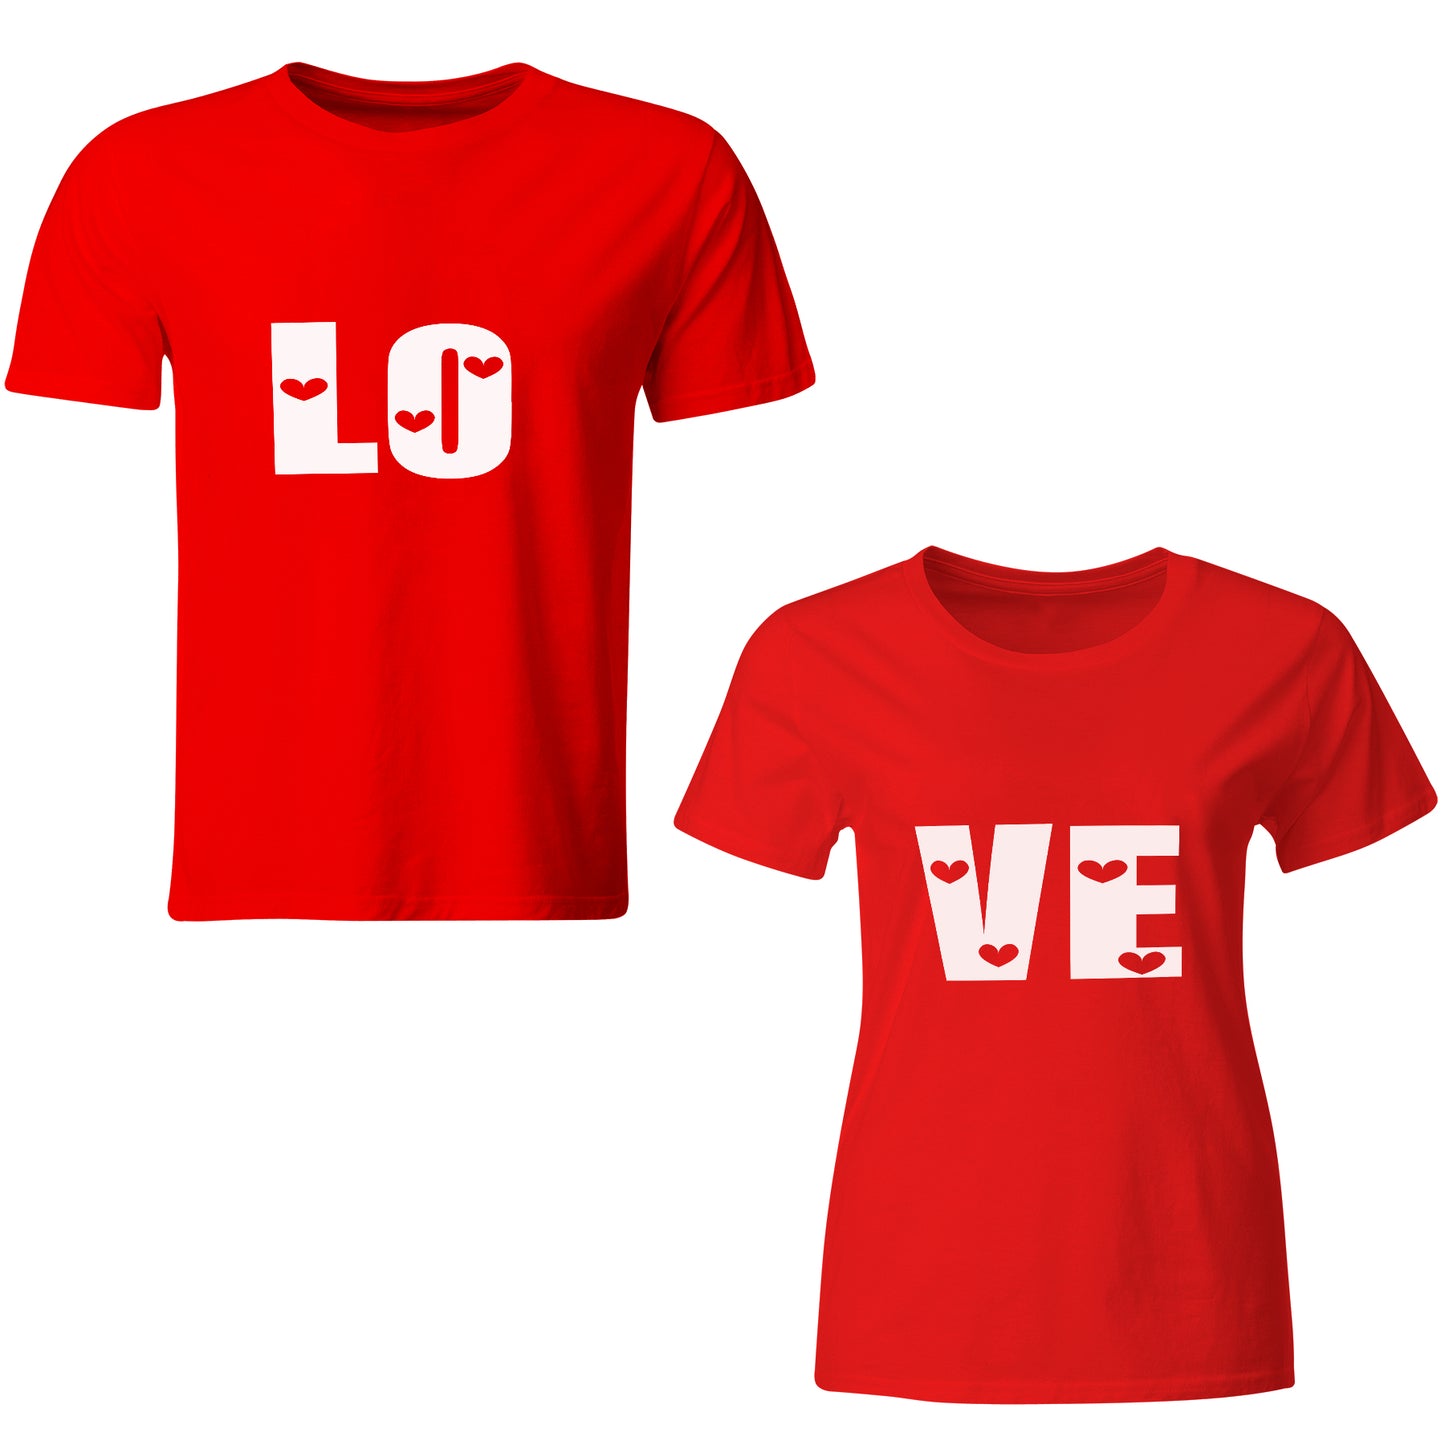 Lovematching Couple T shirts- Red